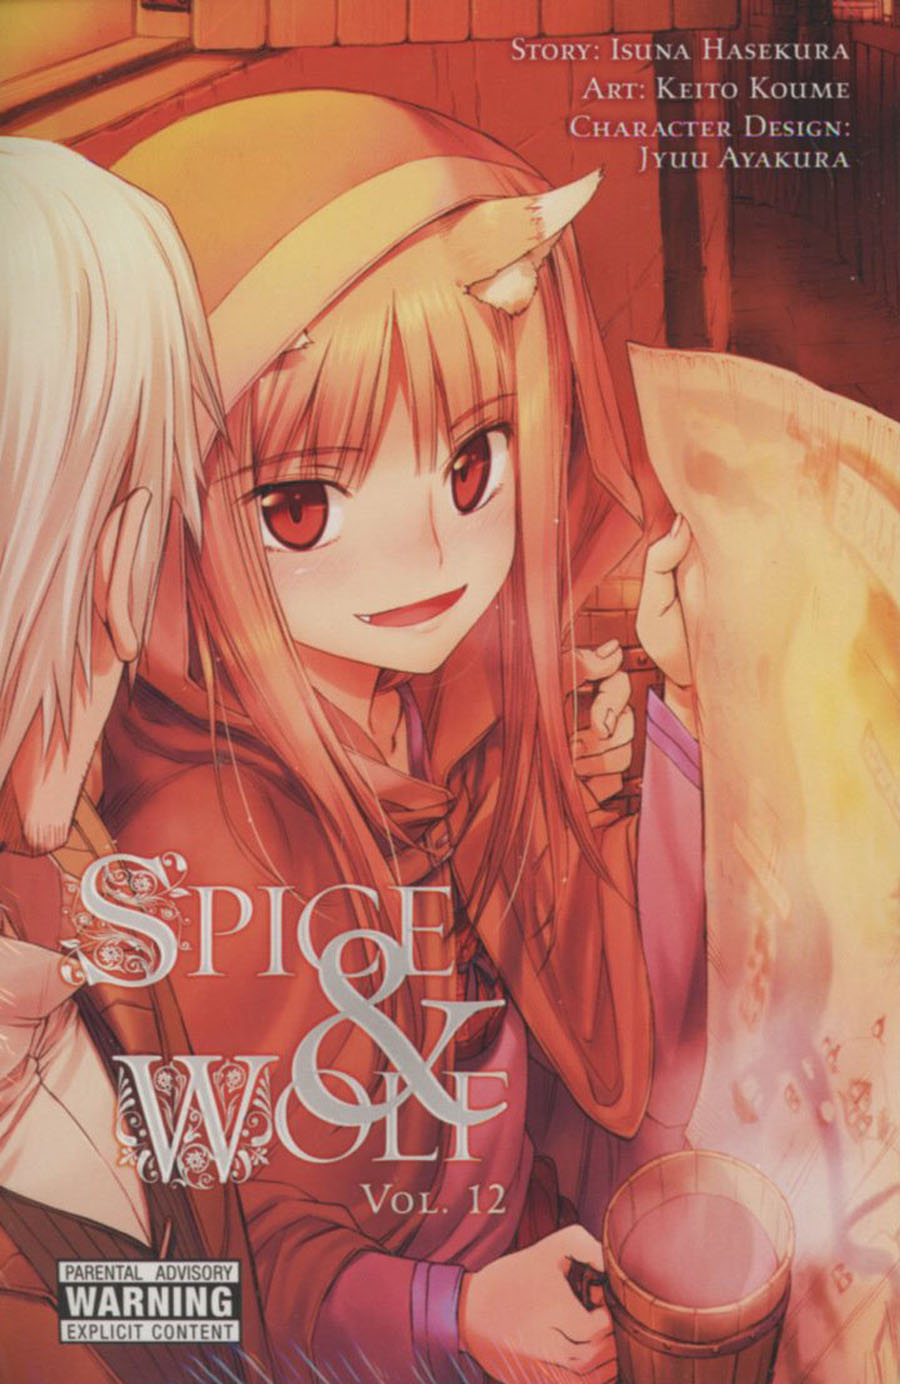 Spice & Wolf Vol 12 GN